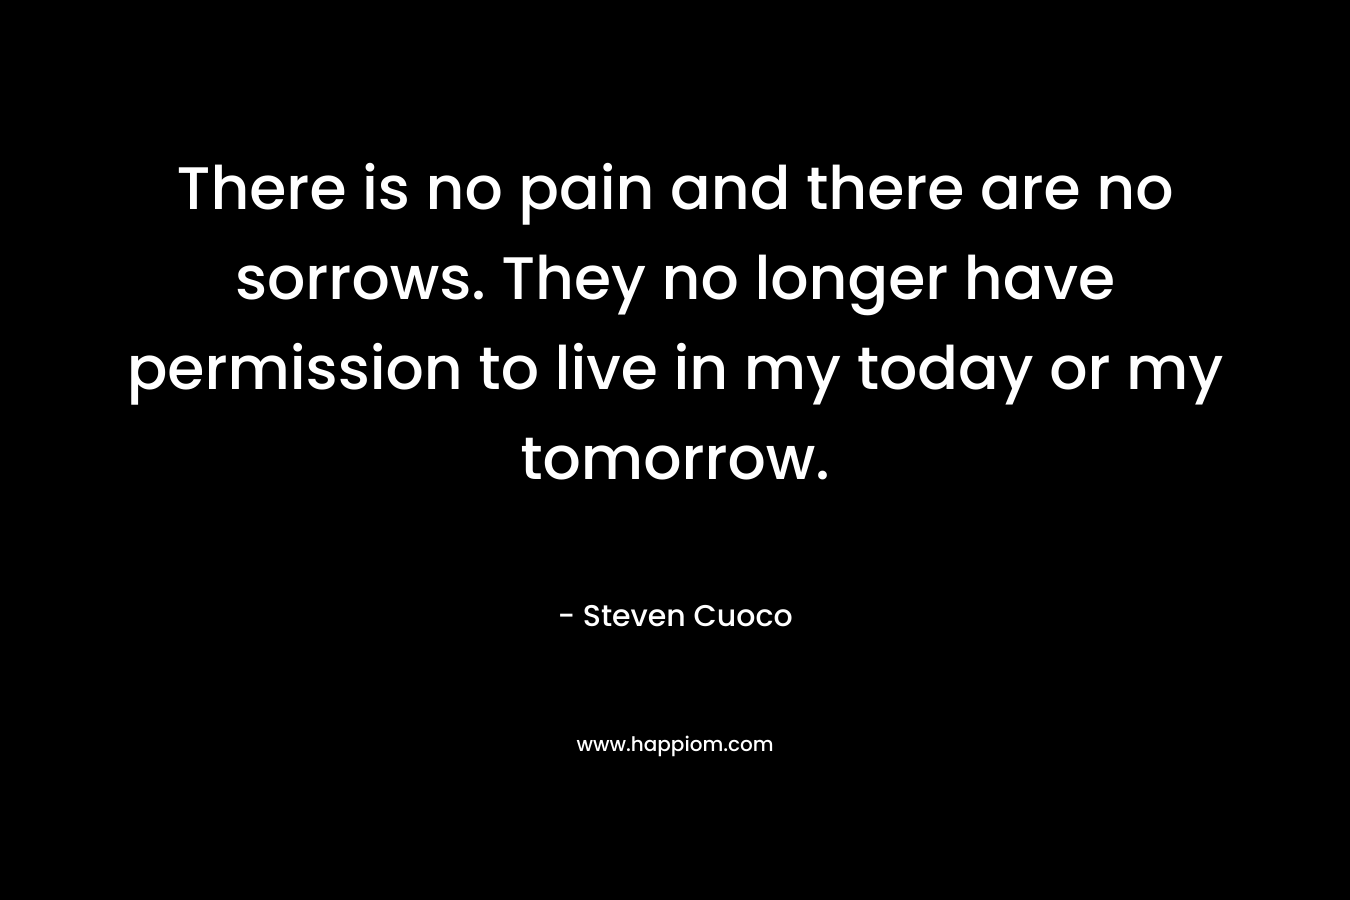 There is no pain and there are no sorrows. They no longer have permission to live in my today or my tomorrow. – Steven Cuoco